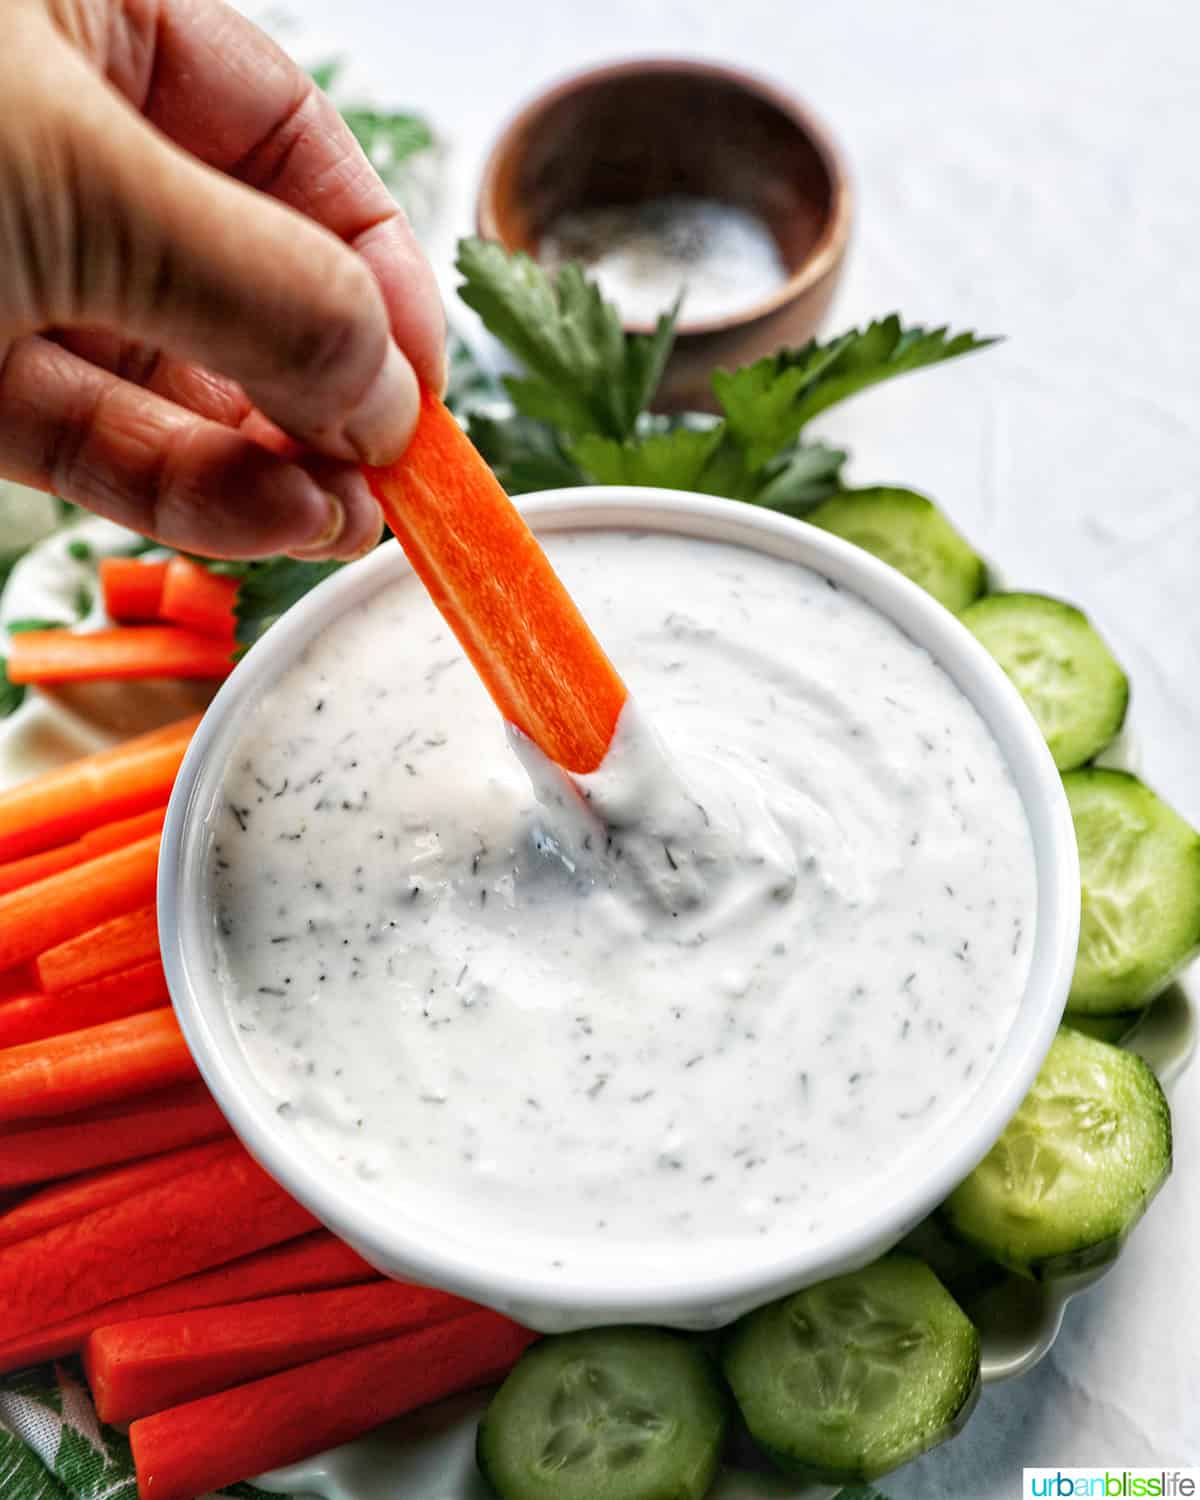 bowl of dairy free ranch dressing with carrot sticks, cucumber slices, and herbs.